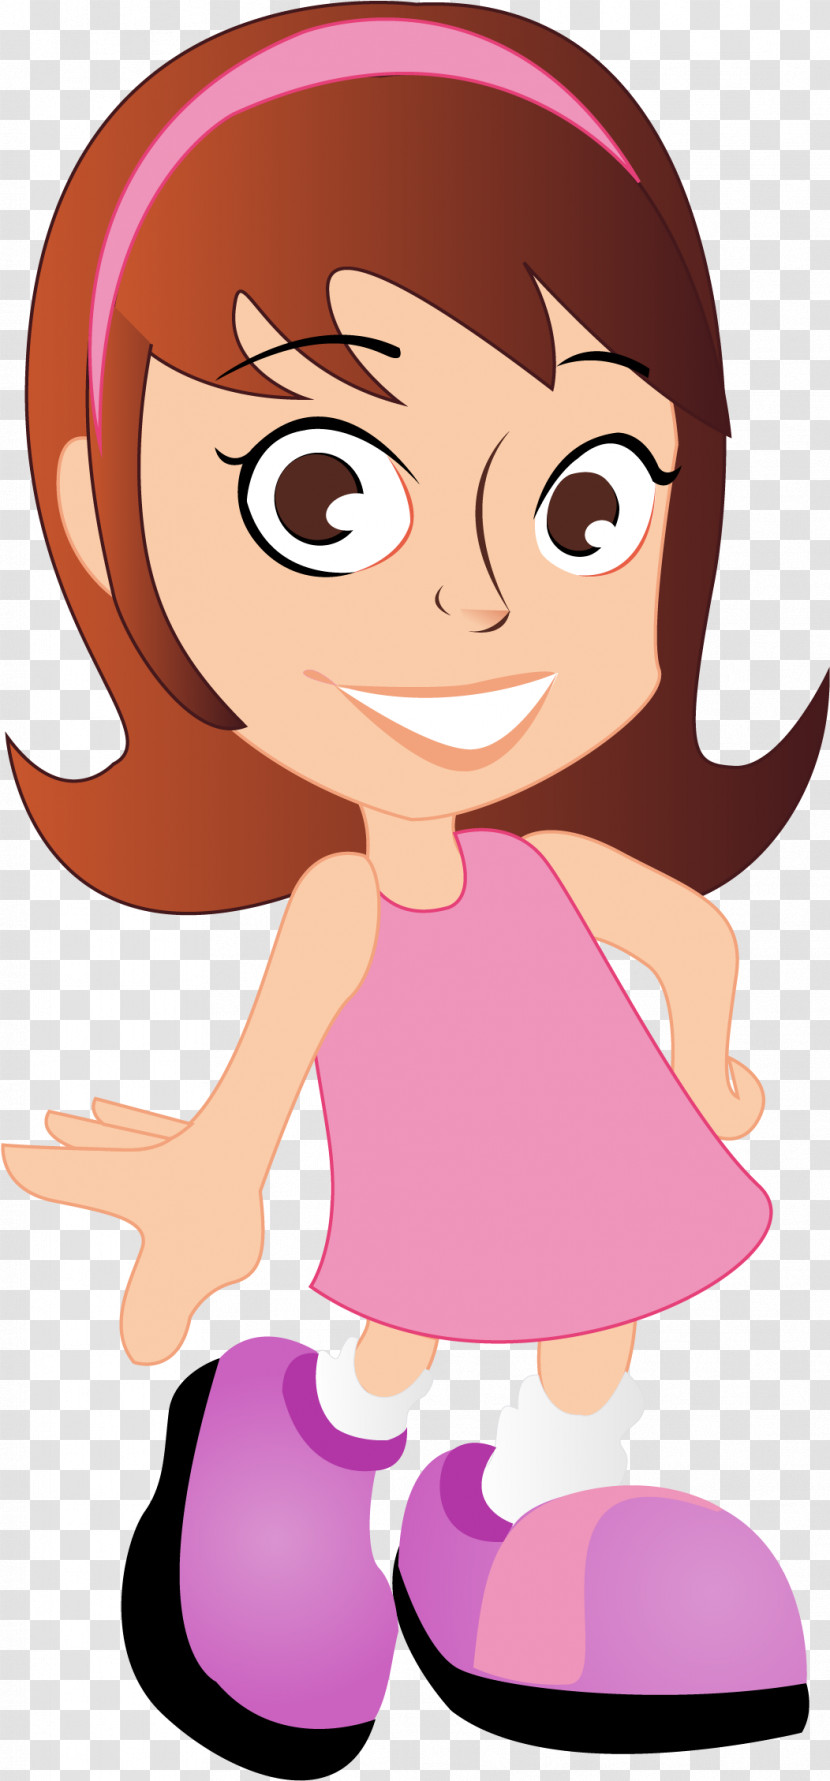 Cartoon Animation Finger Smile Style Transparent PNG